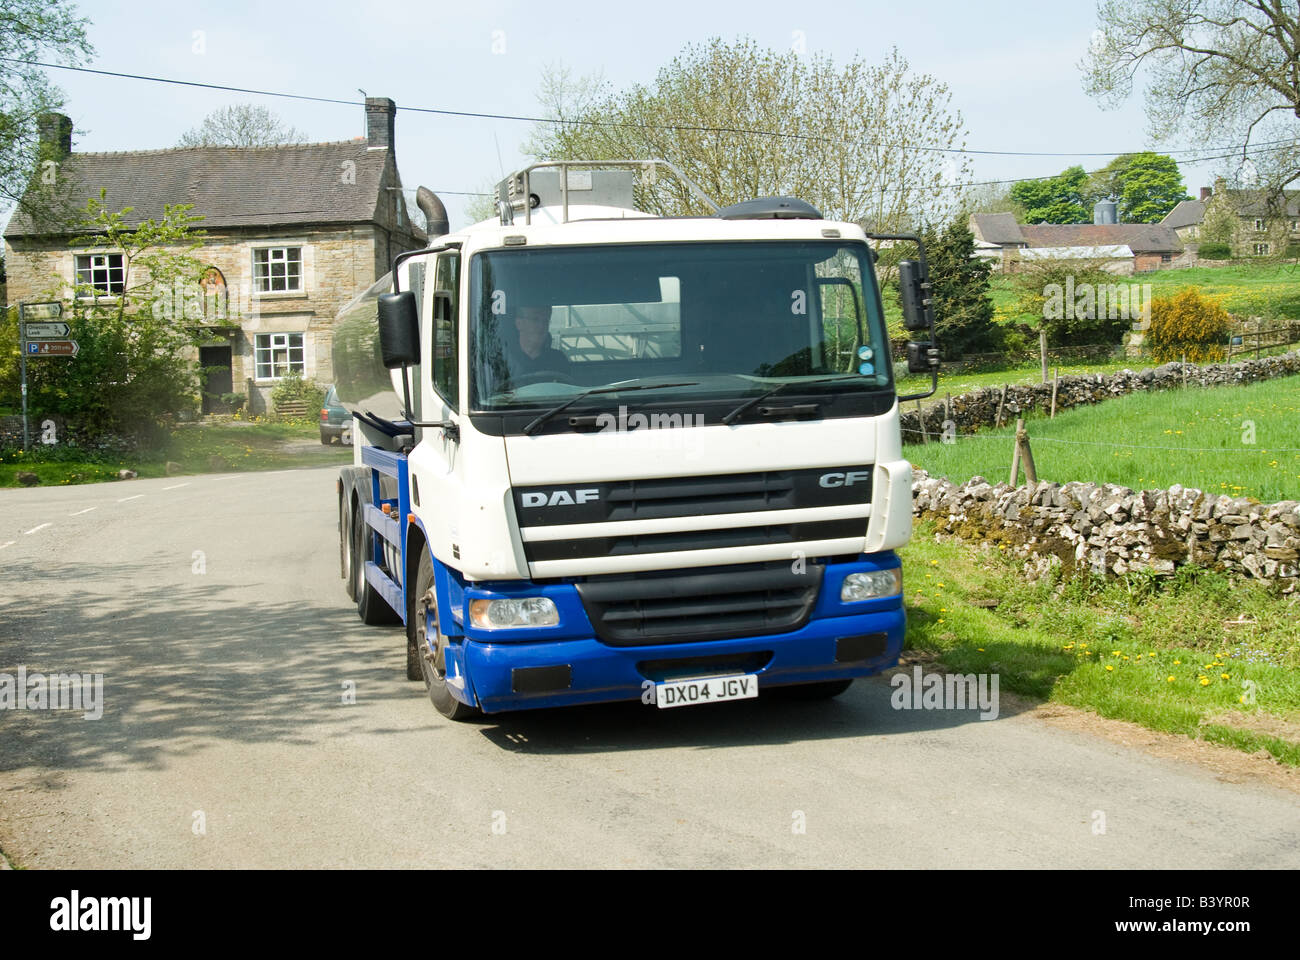 daf milk tanker travelling through a small village in the derbyshire countryside uk Stock Photo